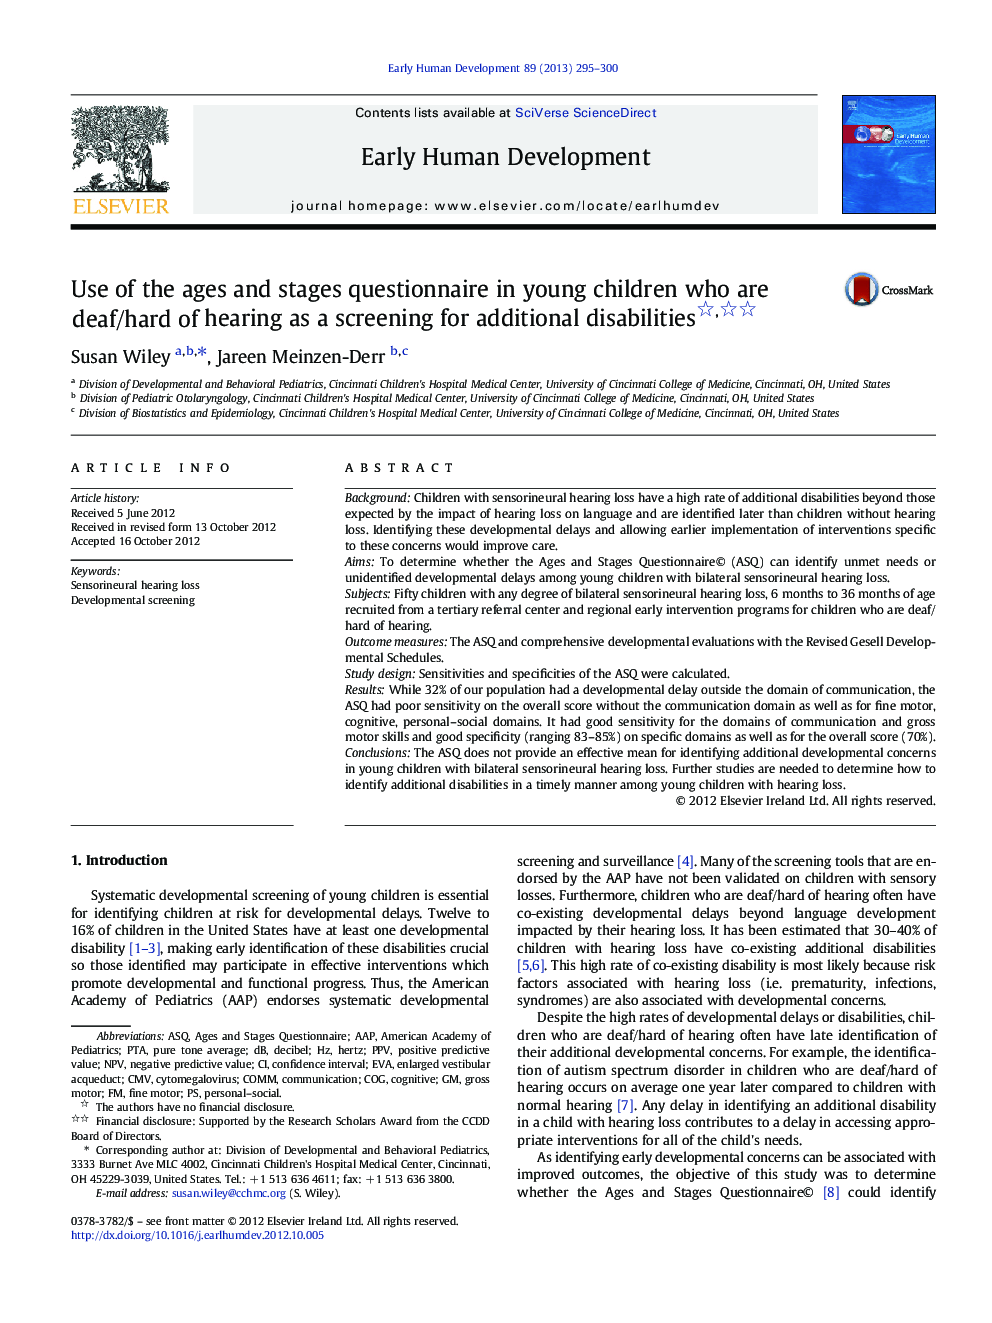 Use of the ages and stages questionnaire in young children who are deaf/hard of hearing as a screening for additional disabilities